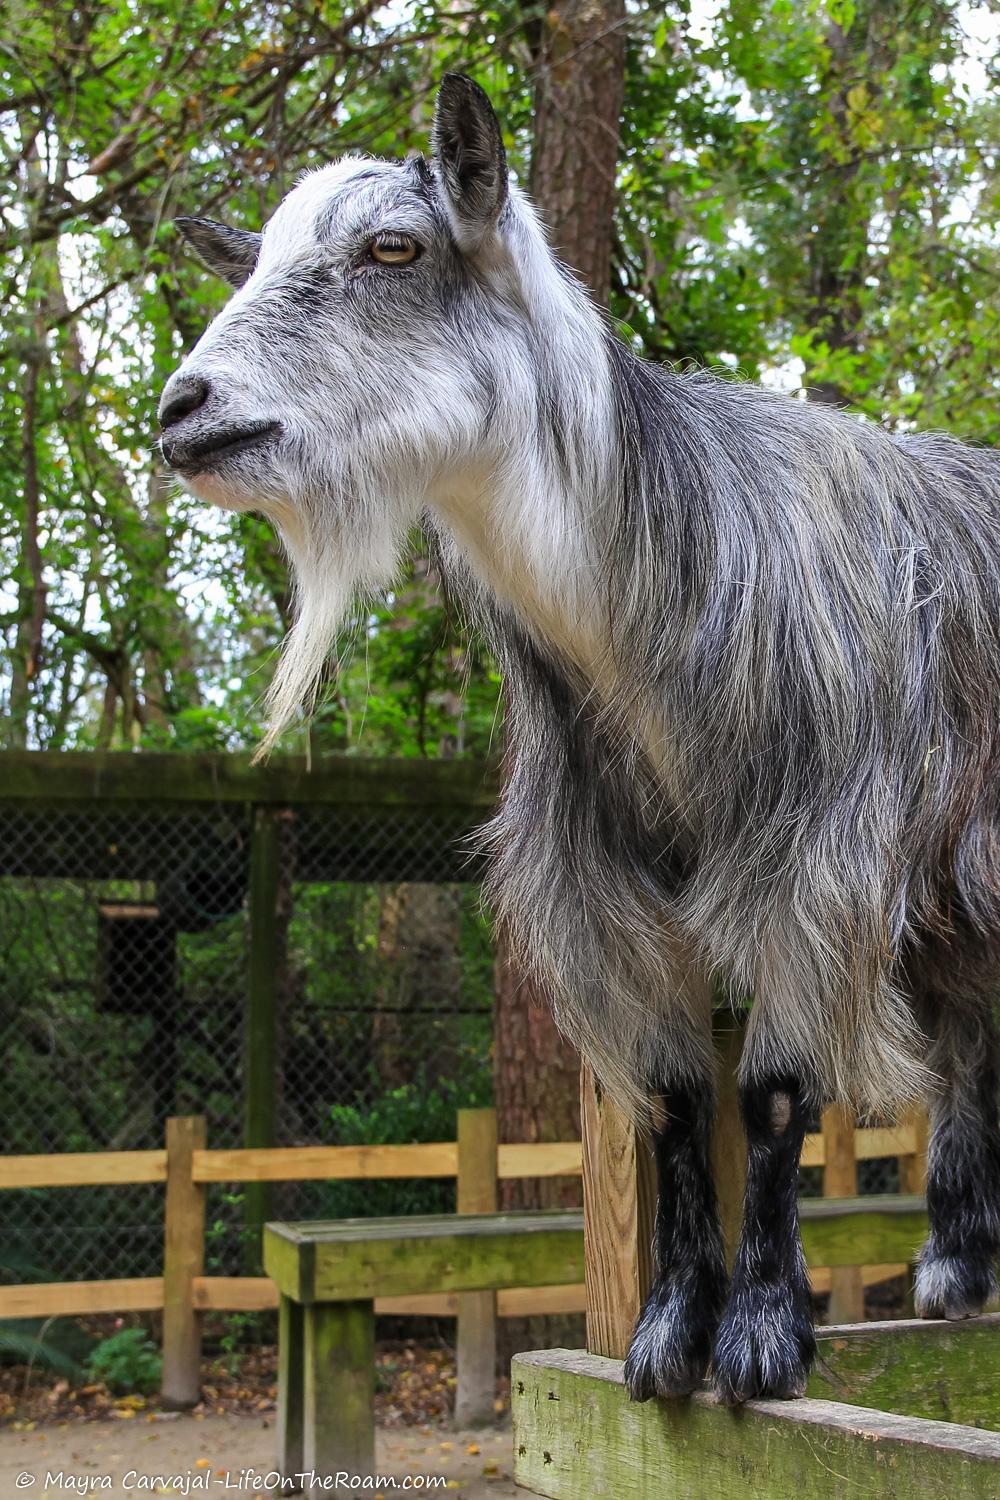 A goat standing on a fence